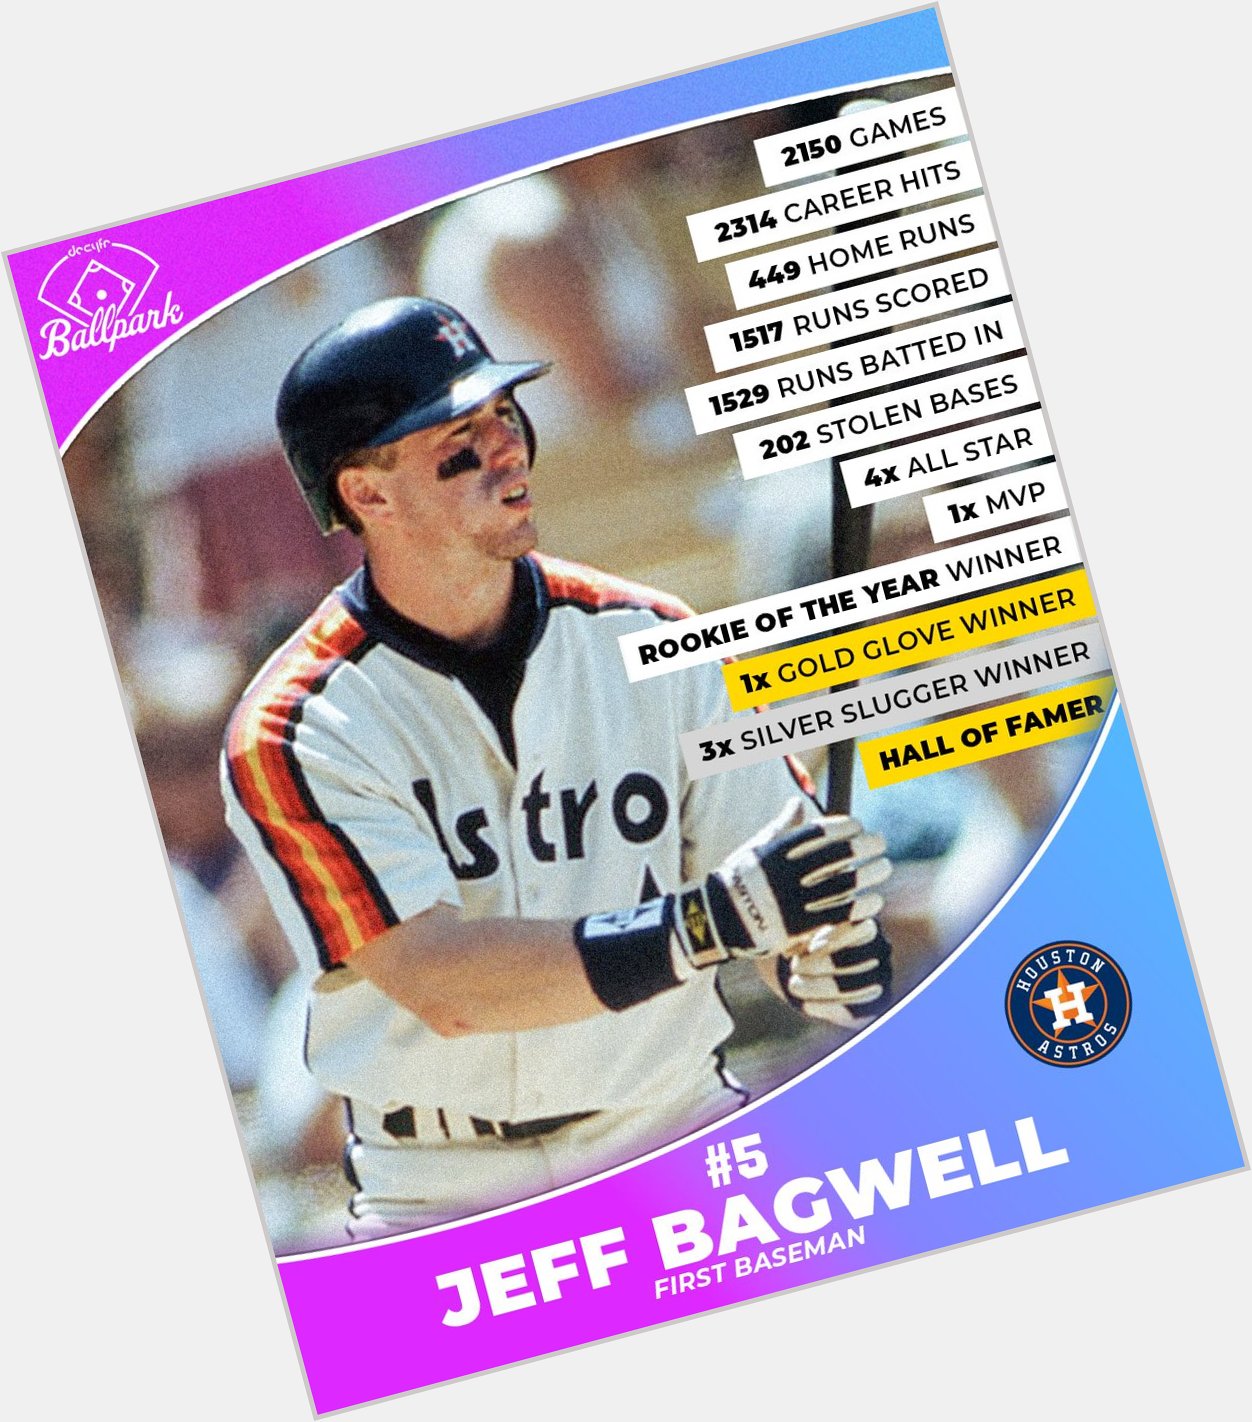 Wishing a very happy birthday to one of the  Killer B s, Jeff Bagwell!    